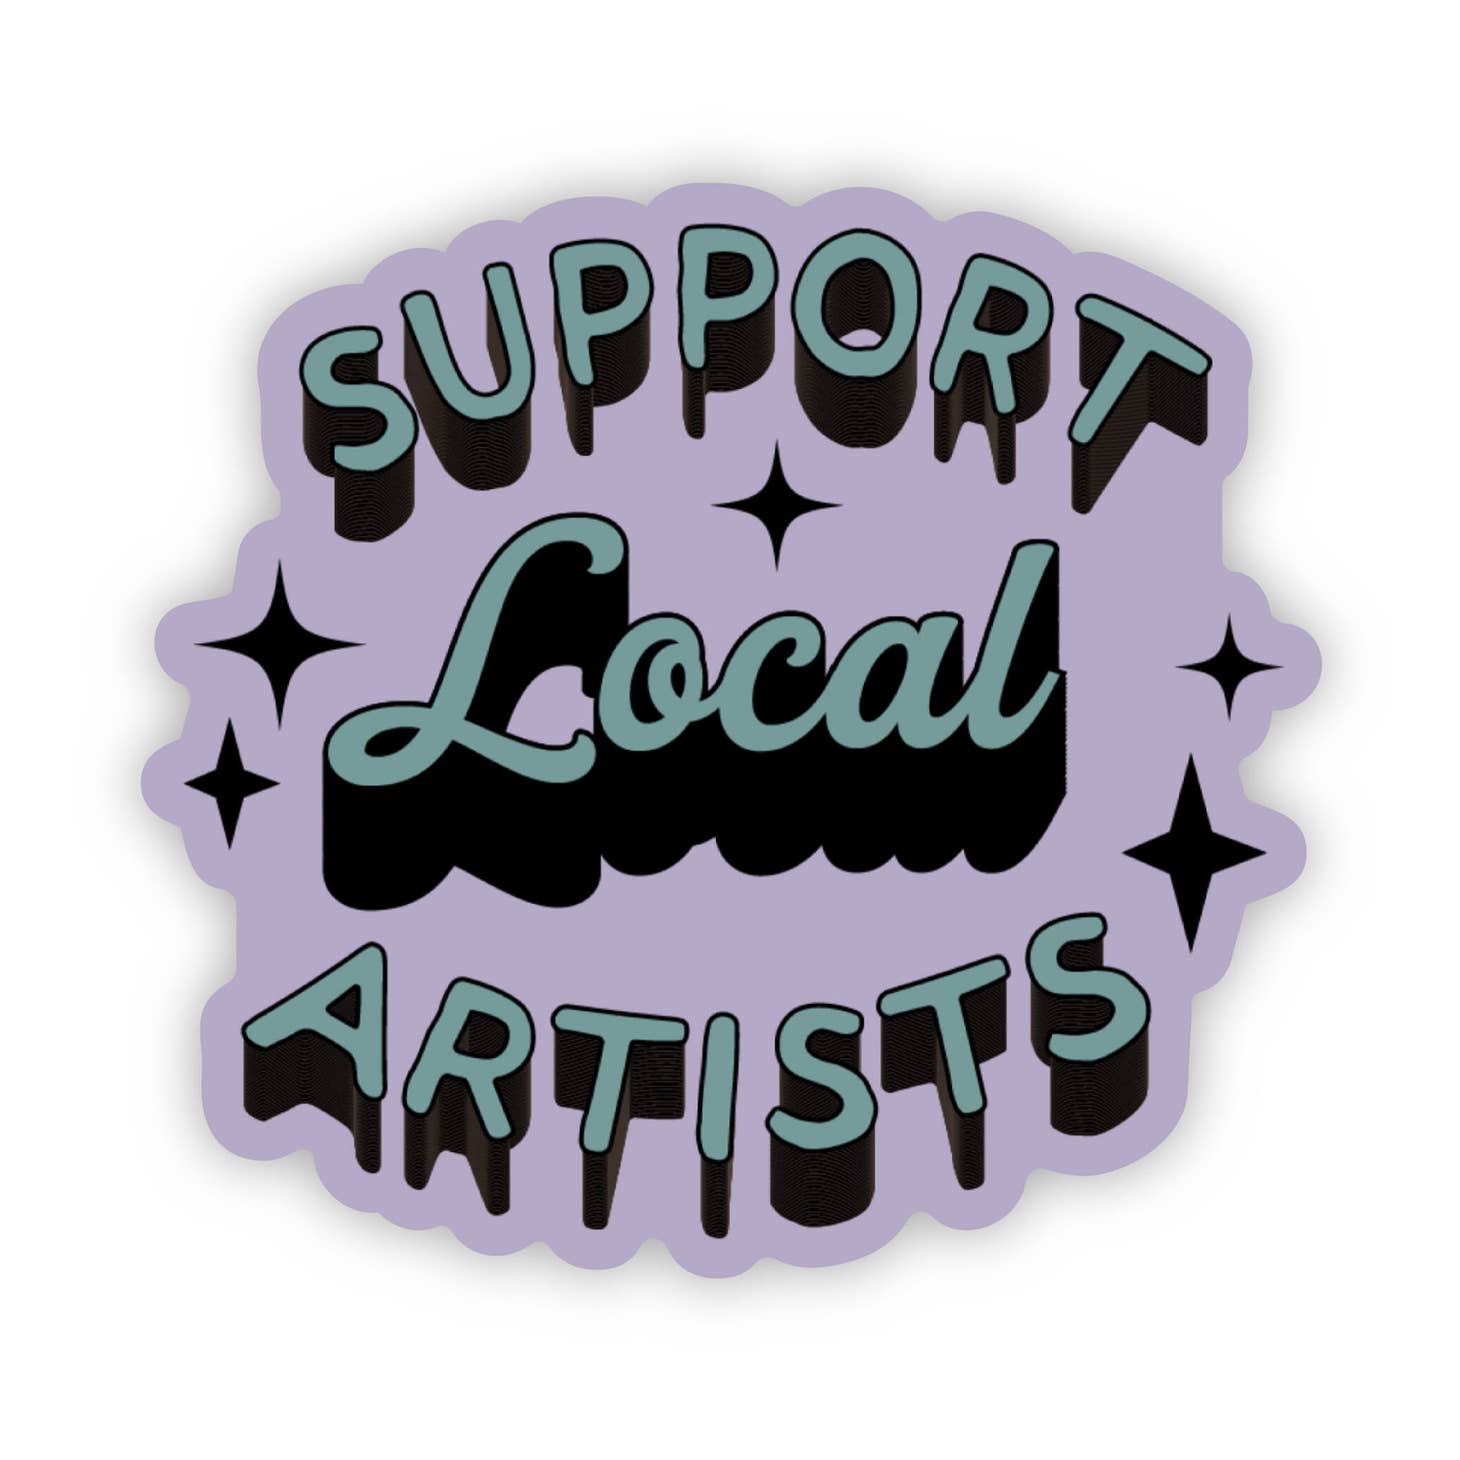 What better way to Support Local than with this sticker. It's great for water bottles, laptops, your favorite local spot window, journal, etc. High quality & durable vinyl, waterproof & weatherproof.